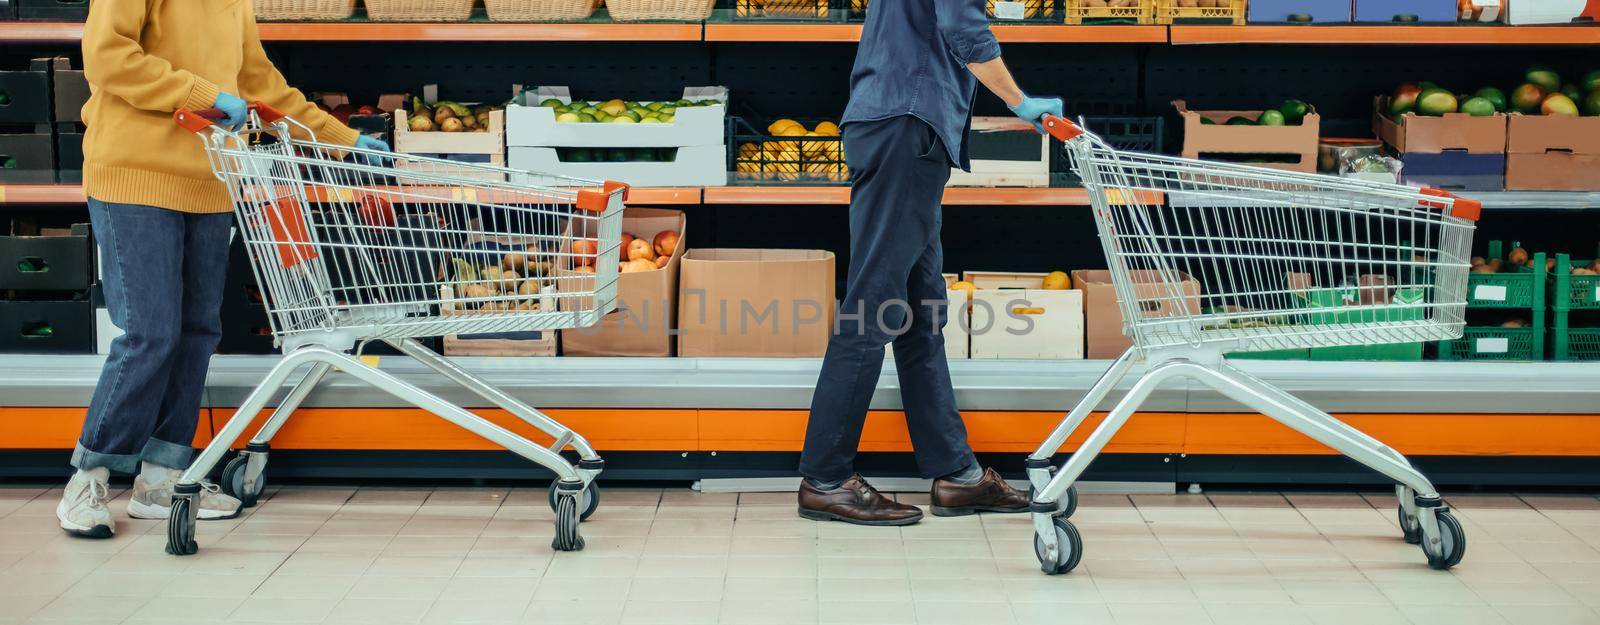 man and a woman with shopping carts in a supermarket during the quarantine period. by SmartPhotoLab